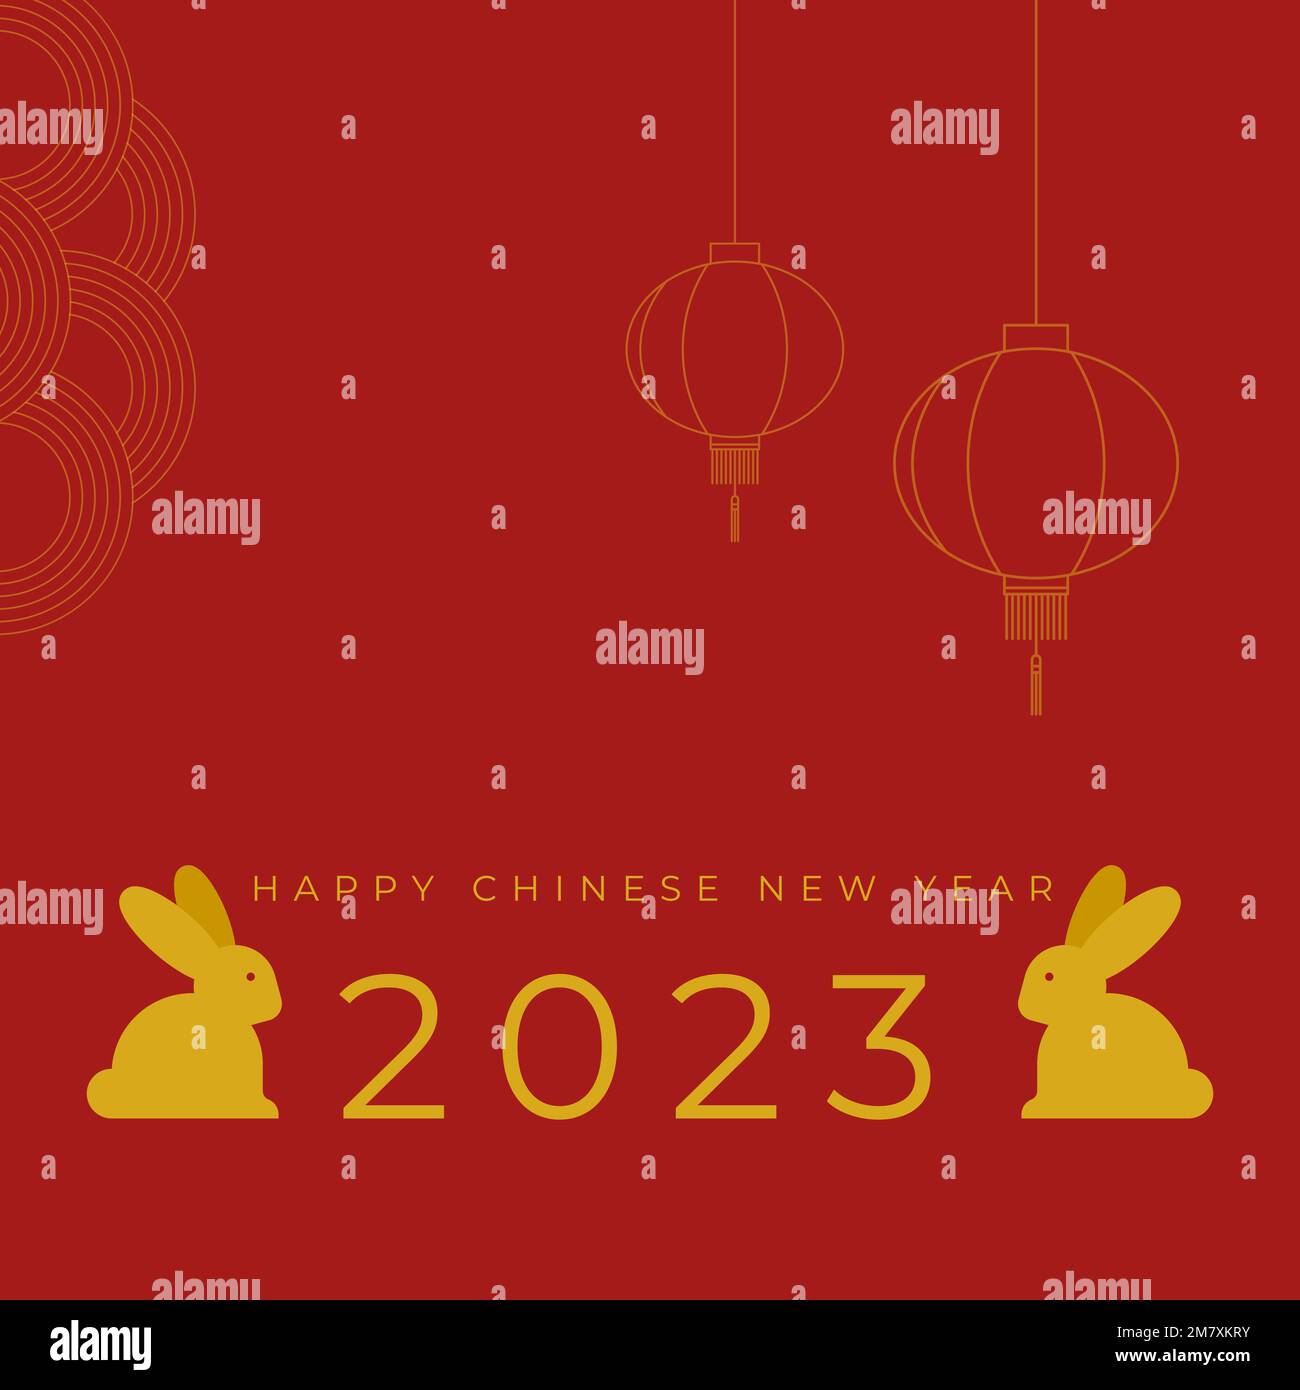 Happy Chinese New Year. Year of the rabbit. 2023. Hanging lanterns. Vector illustration, flat design Stock Vector